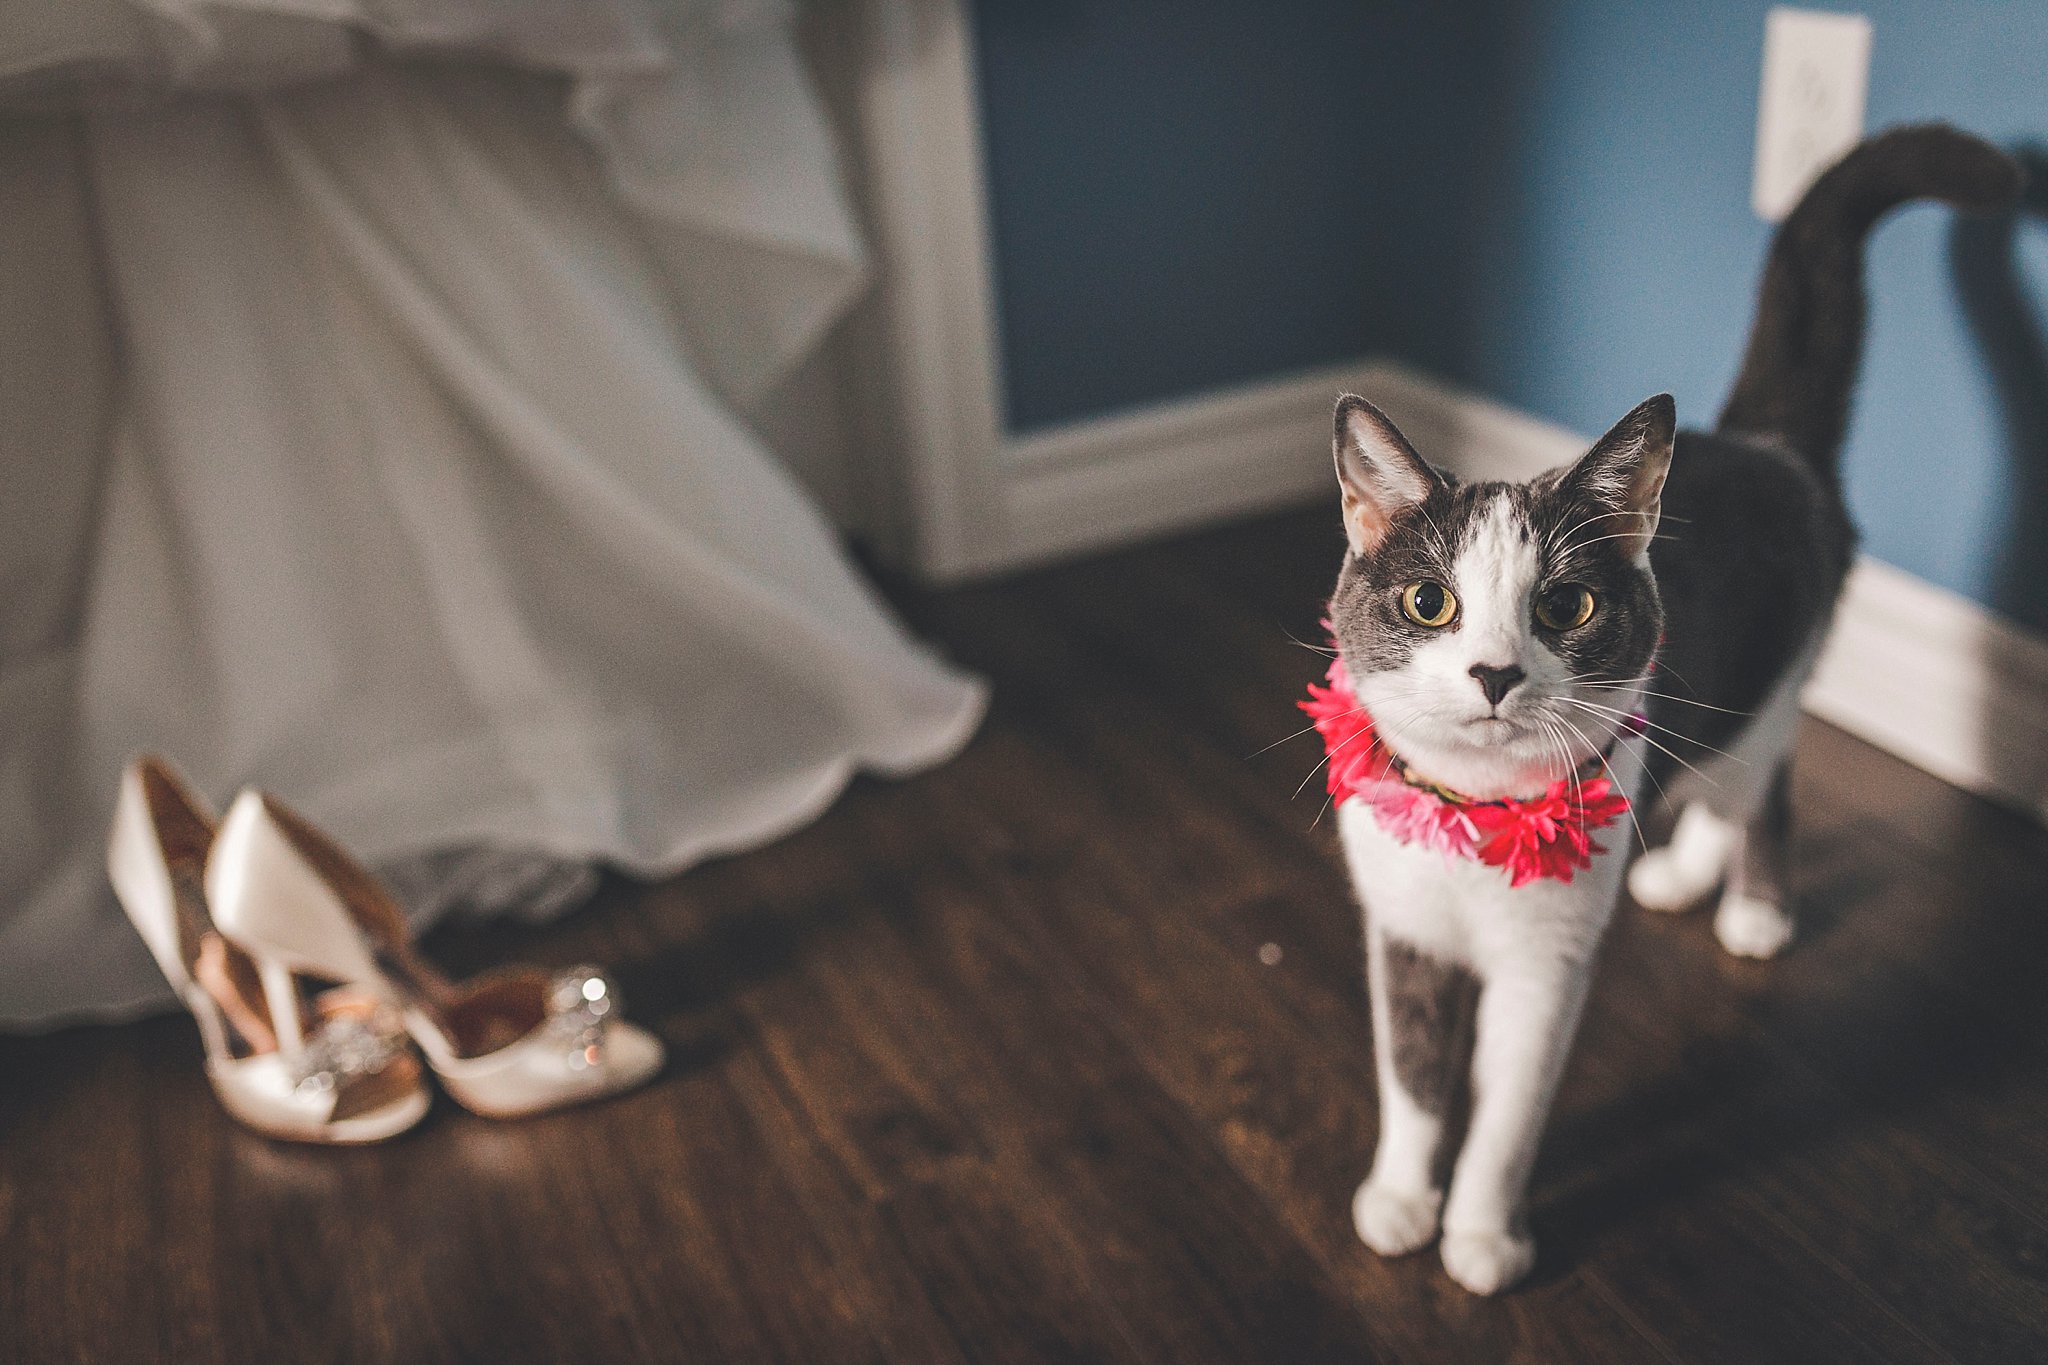 Dress, Shoes and Cat